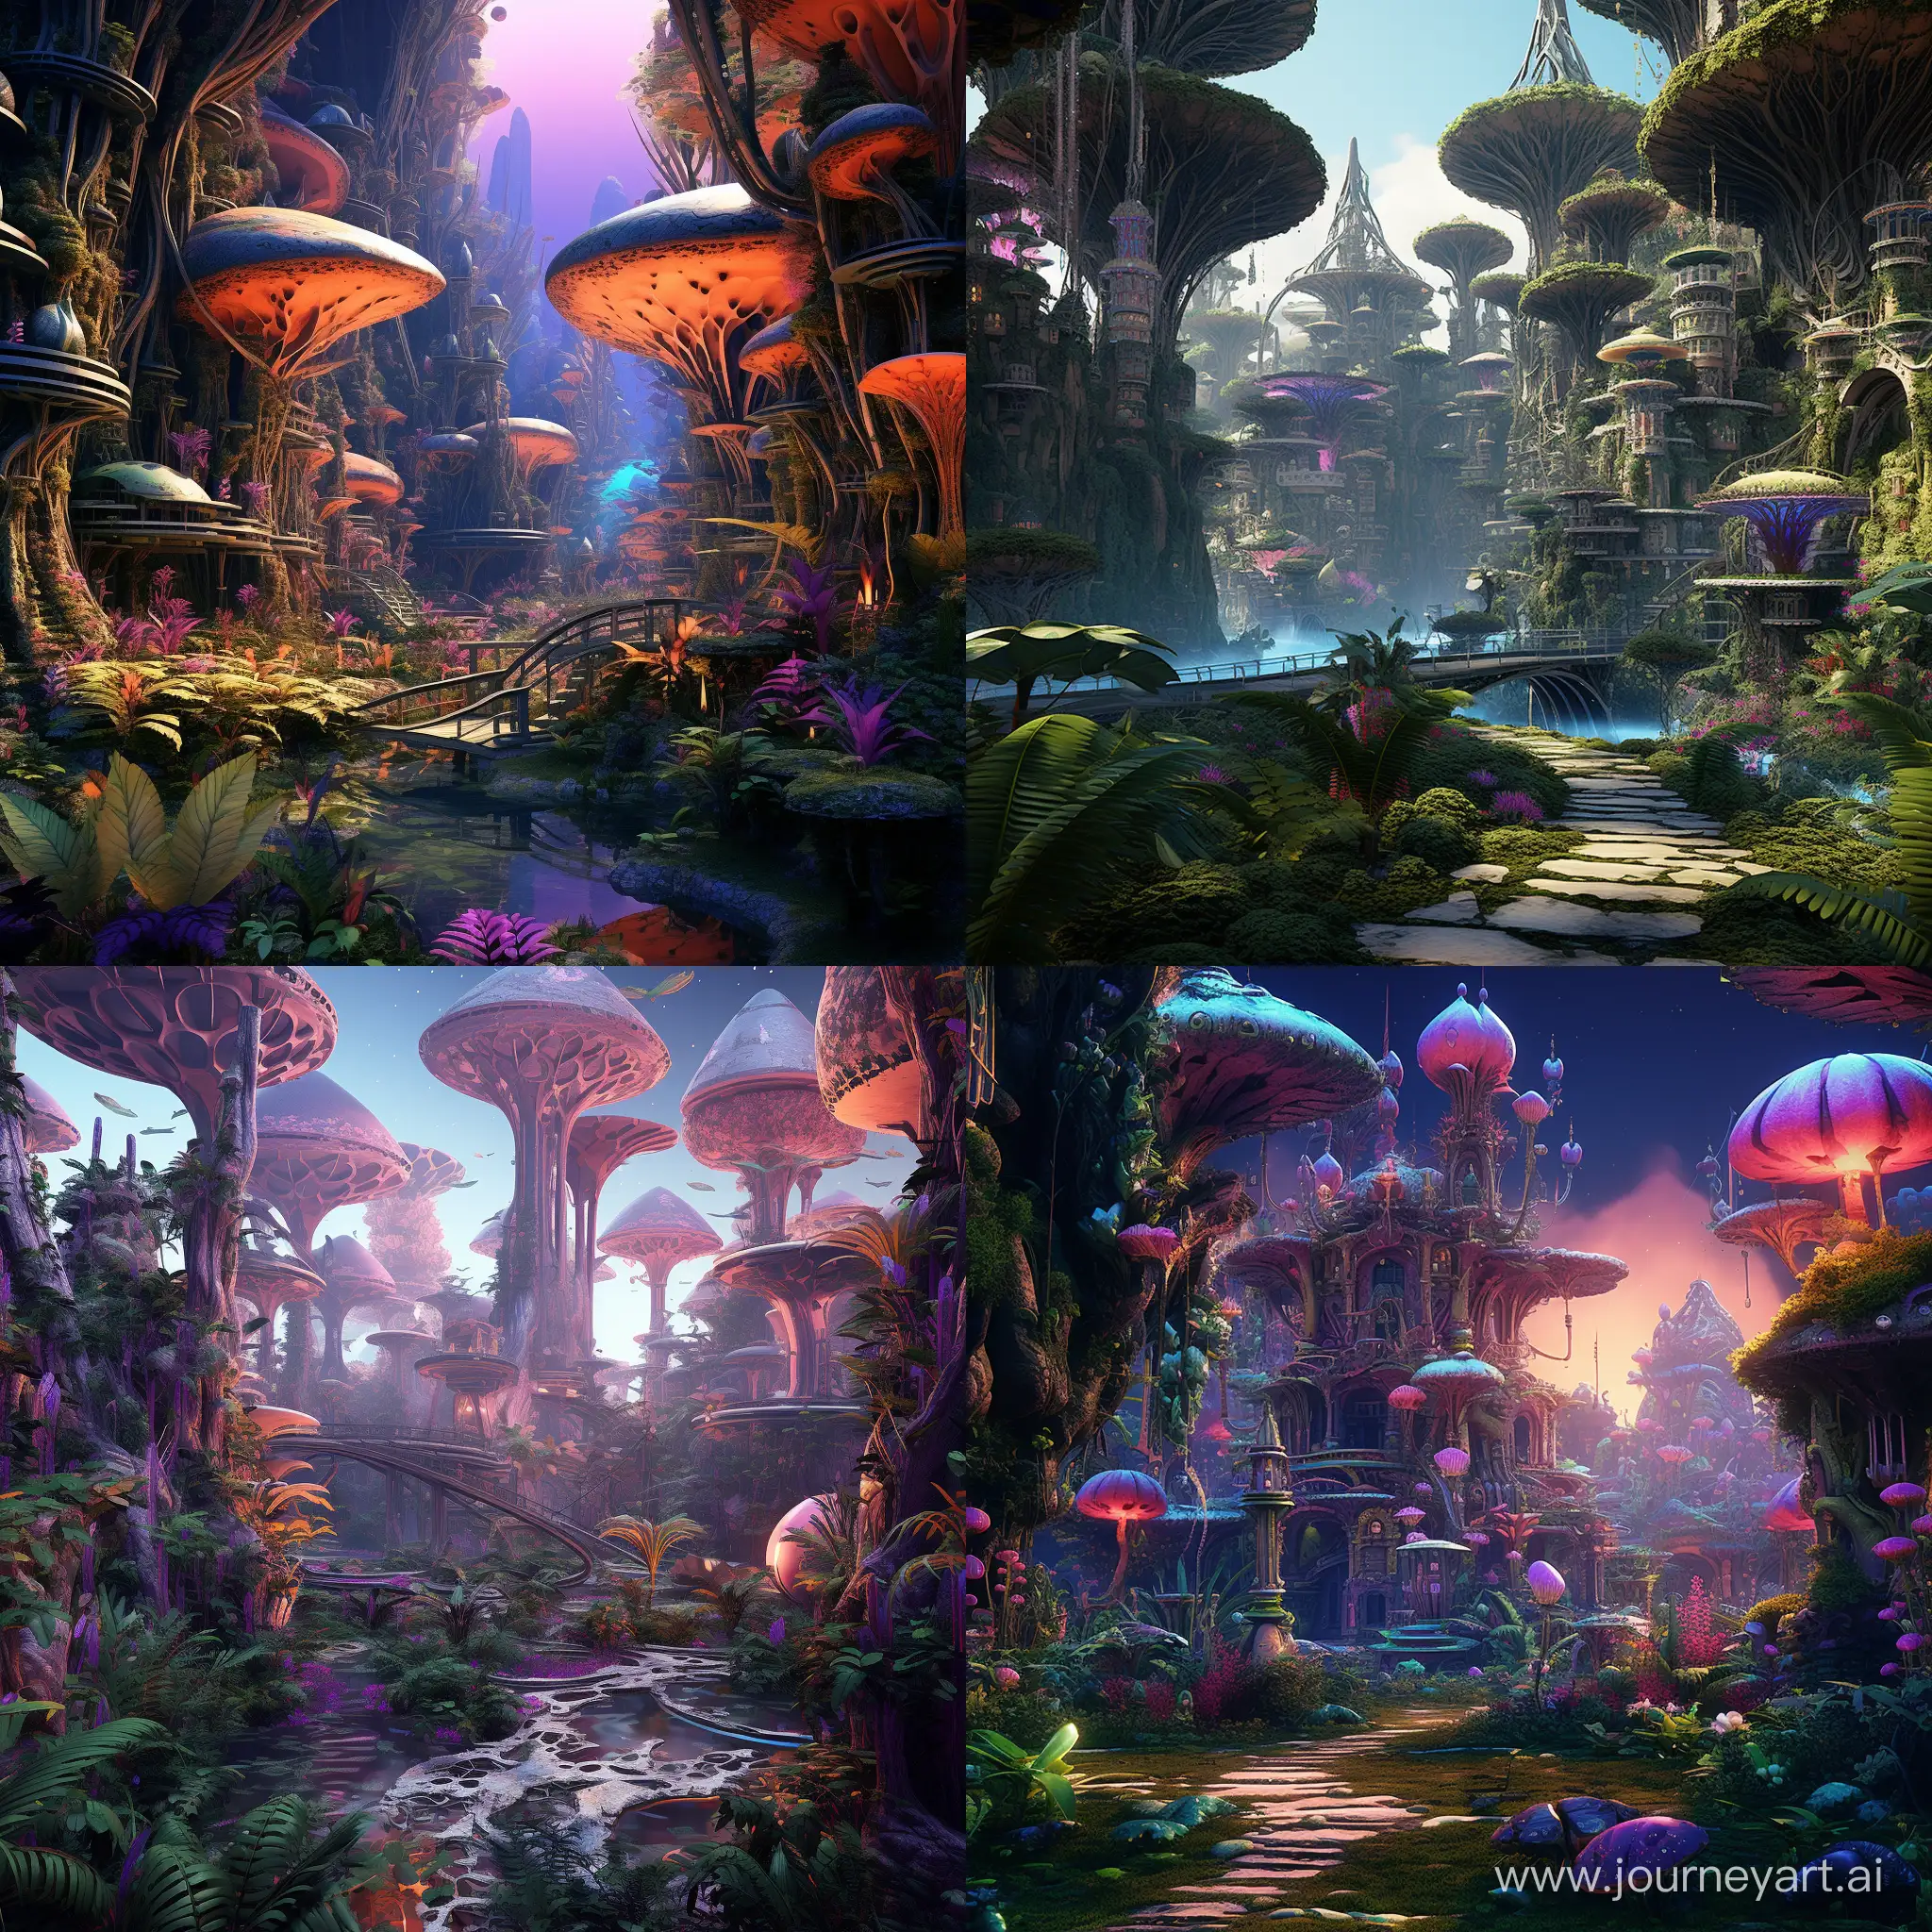 alien village in an alien tropical forest, on an alien planet, ultraphotorealistic, ambient occlusion lighting alien, otherworldly, enchanted, fantasy, futuristic, outlandish, whimsical, trippy, imagination, psychedelic colors, mysterious fantasticalfractal,microfractalpunk,ultraenergypunk,fractalneonpunk, in flat style,